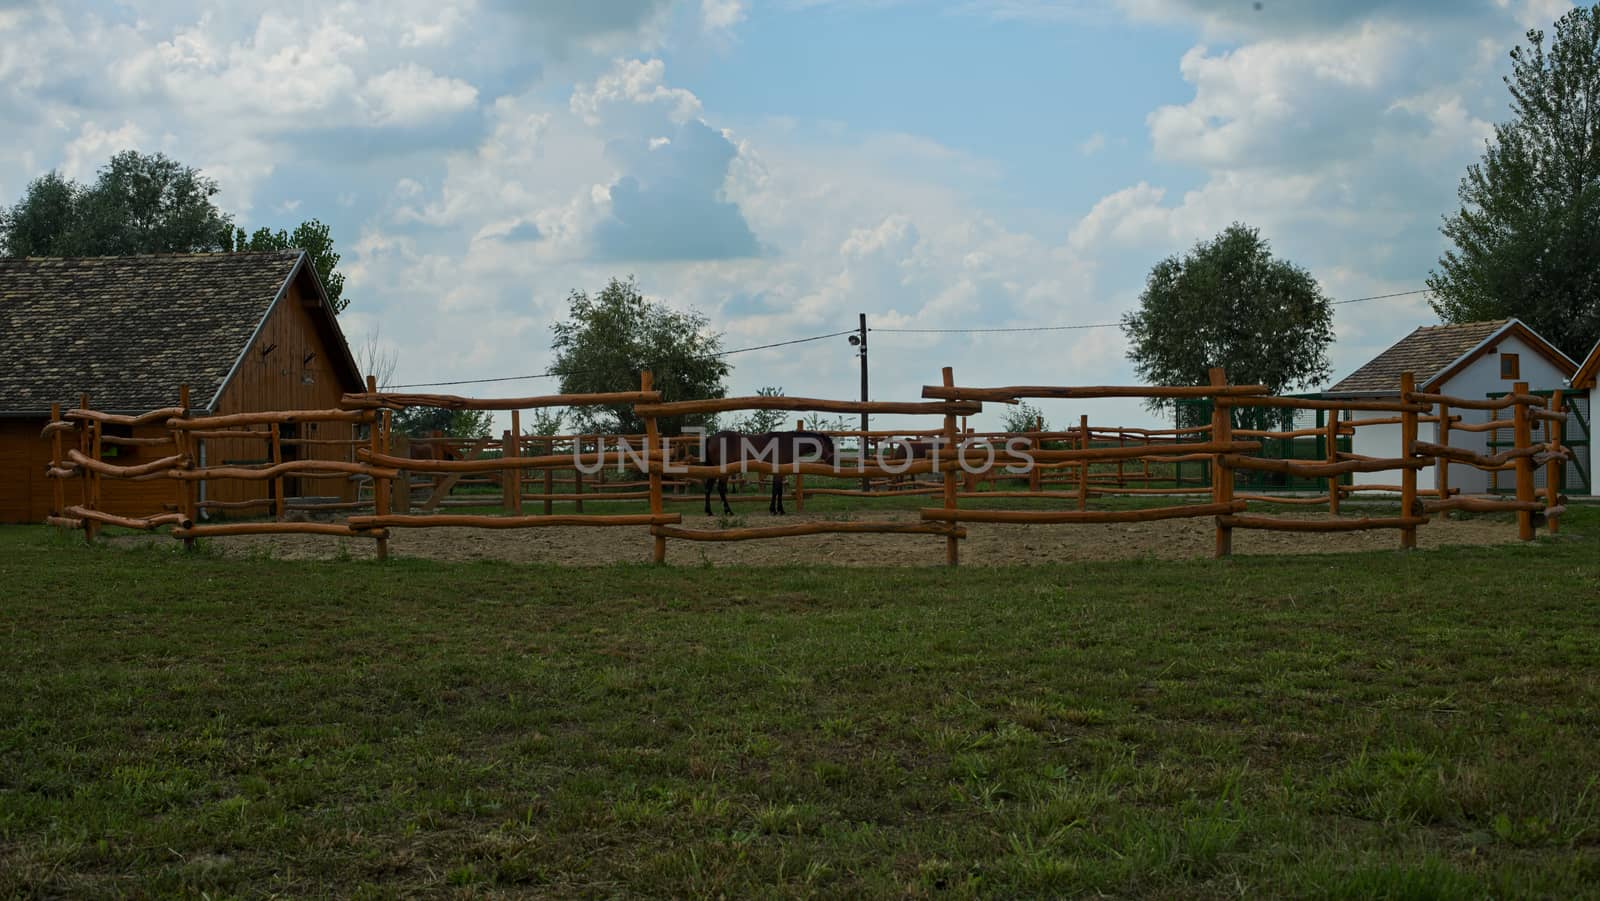 Fenced area with a brown horse inside it by sheriffkule